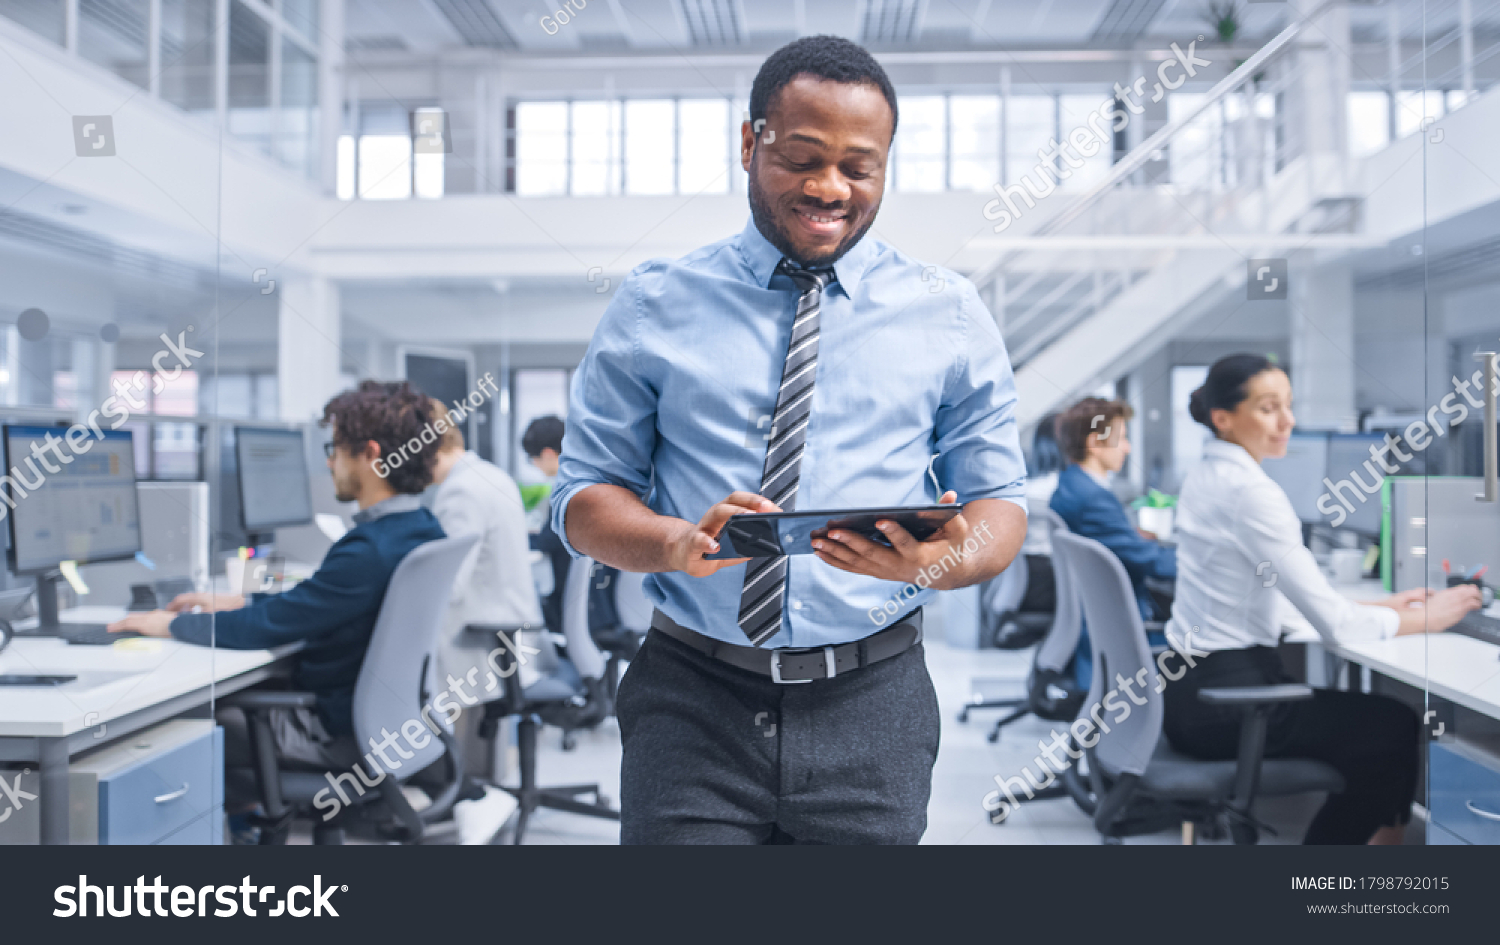 Handsome Young Black Manager in a Shirt Walking Pass His Business Colleagues with a Tablet and Supervise Their Work. Diverse and Motivated Business People Work on Computers in Modern Open Office. #1798792015